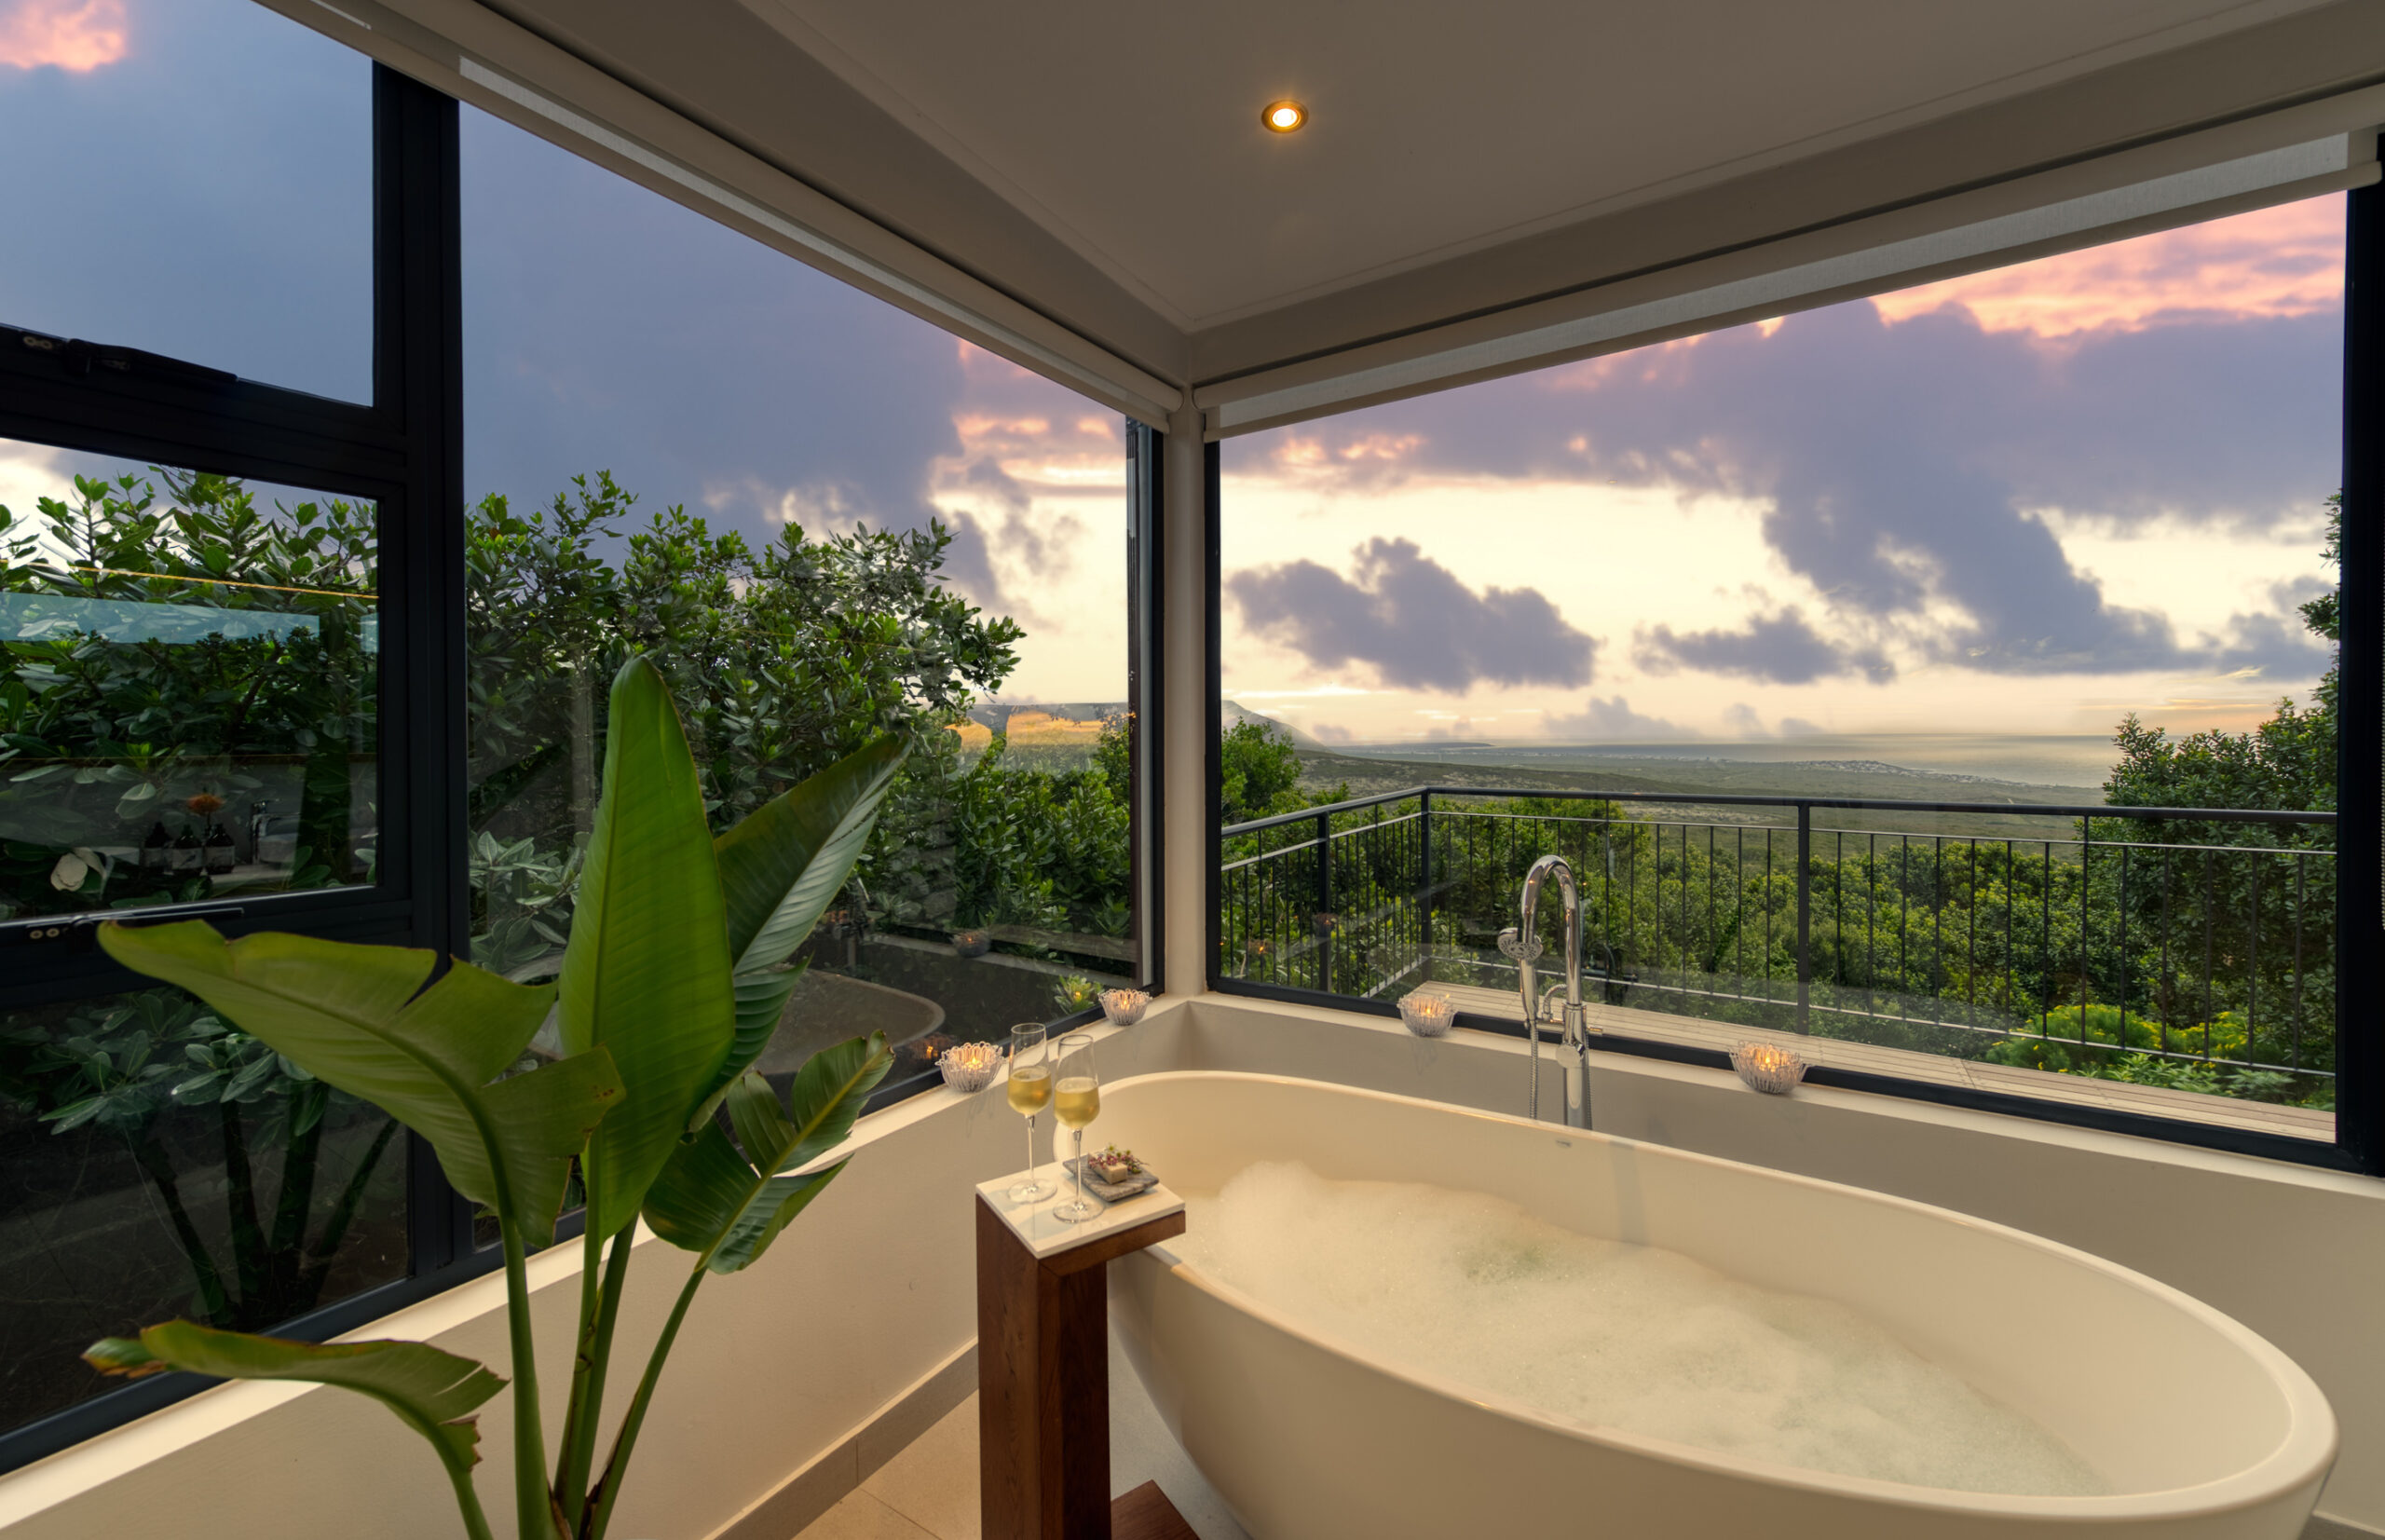 Grootbos Private Nature Reserve Garden Lodge